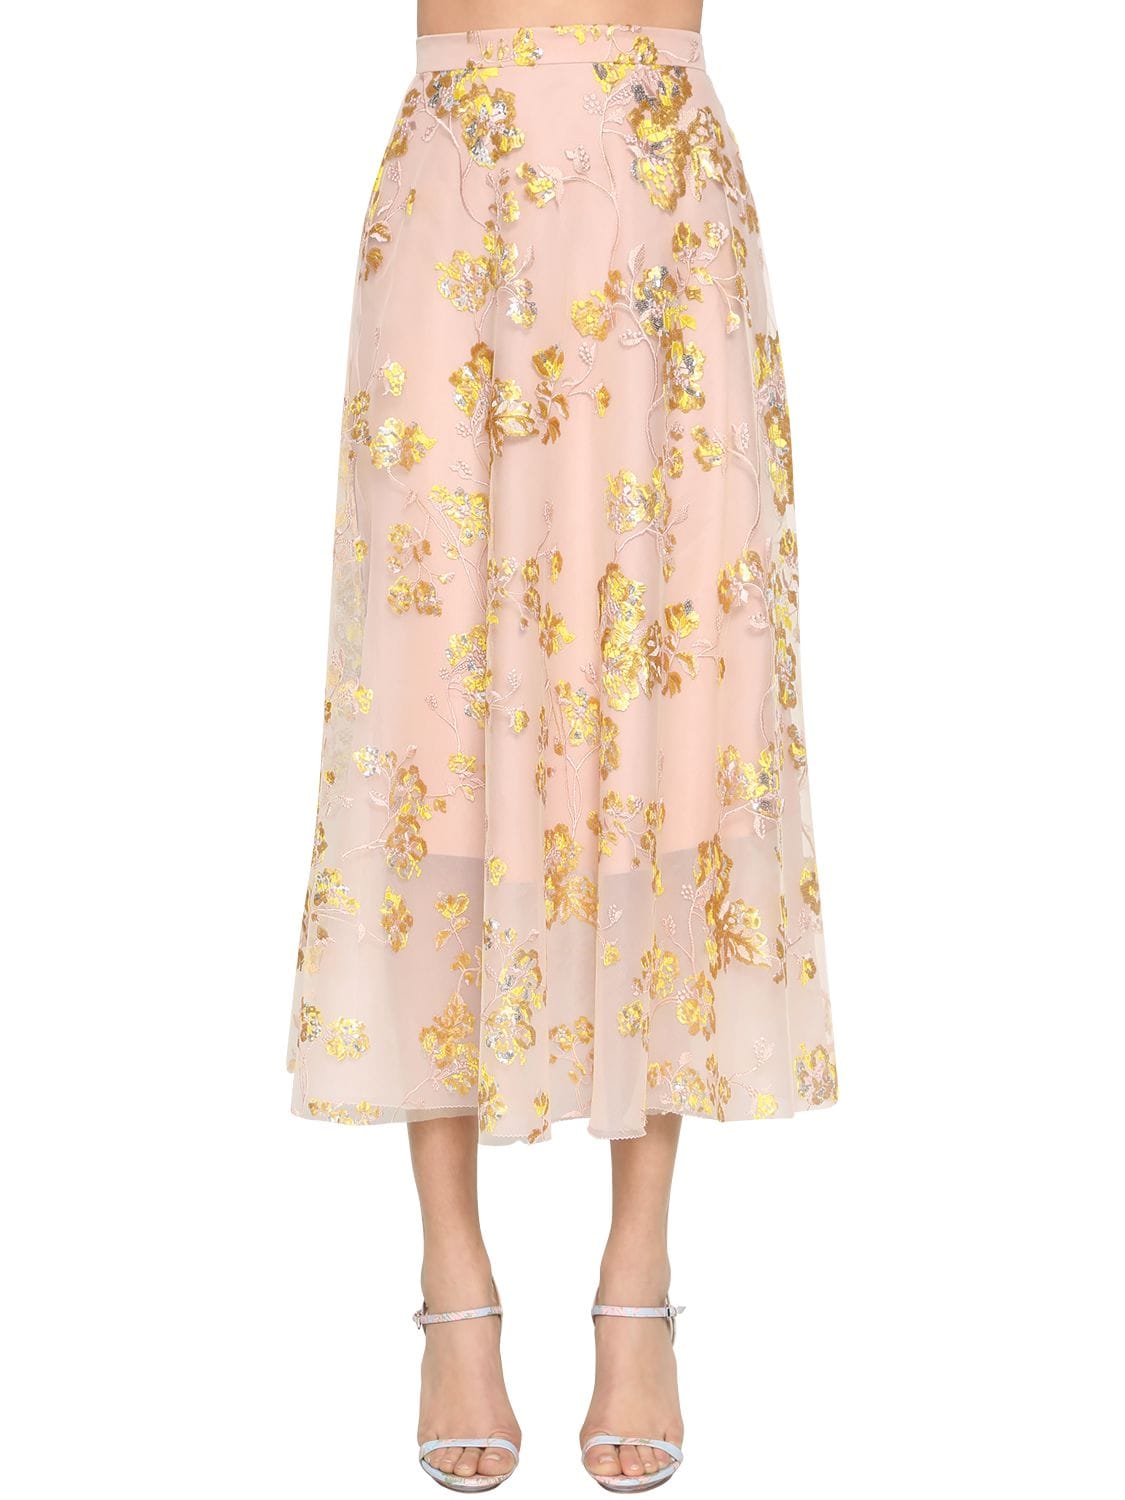 DELPOZO EMBROIDERED CAPE MIDI SKIRT W/ SEQUINS,70IW02002-MTKW0